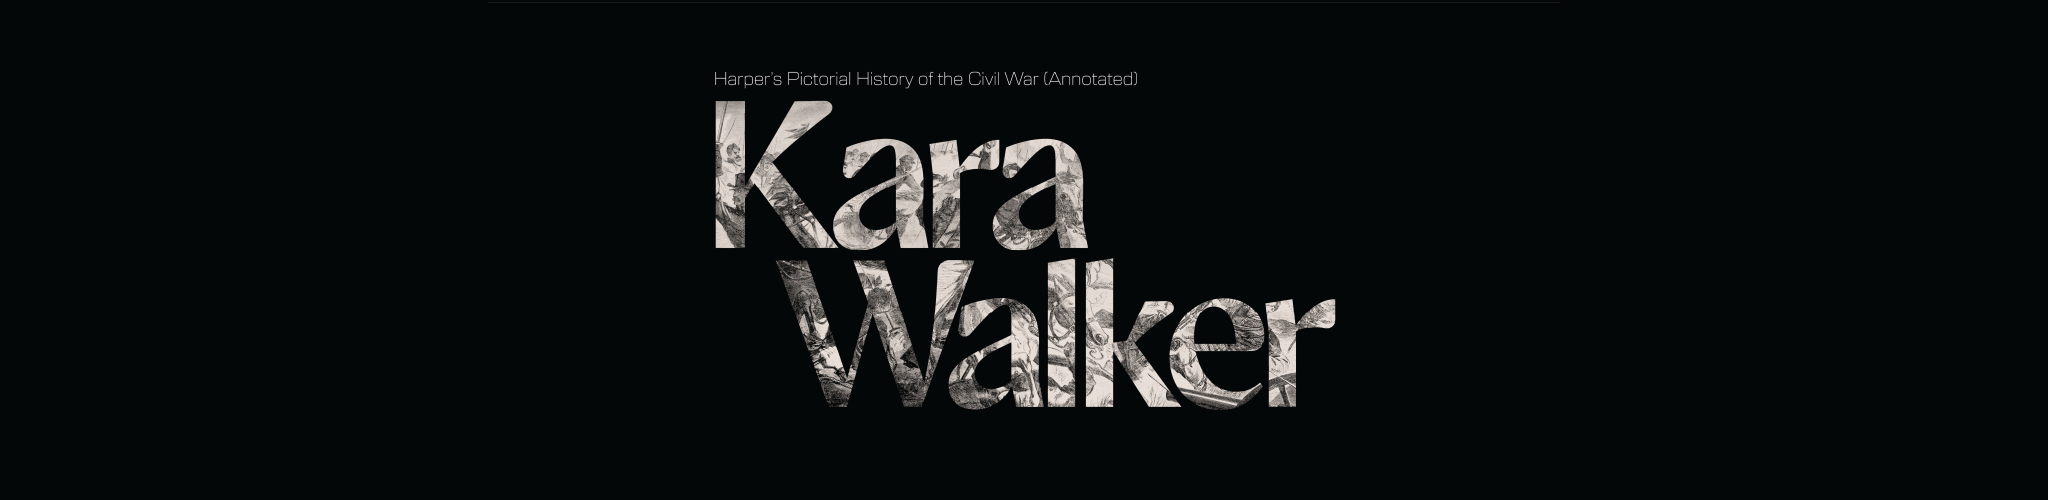 An area of solid black is interrupted by the words "Kara Walker" which reveal a battlefield scene illustrated by Winslow Homer. 